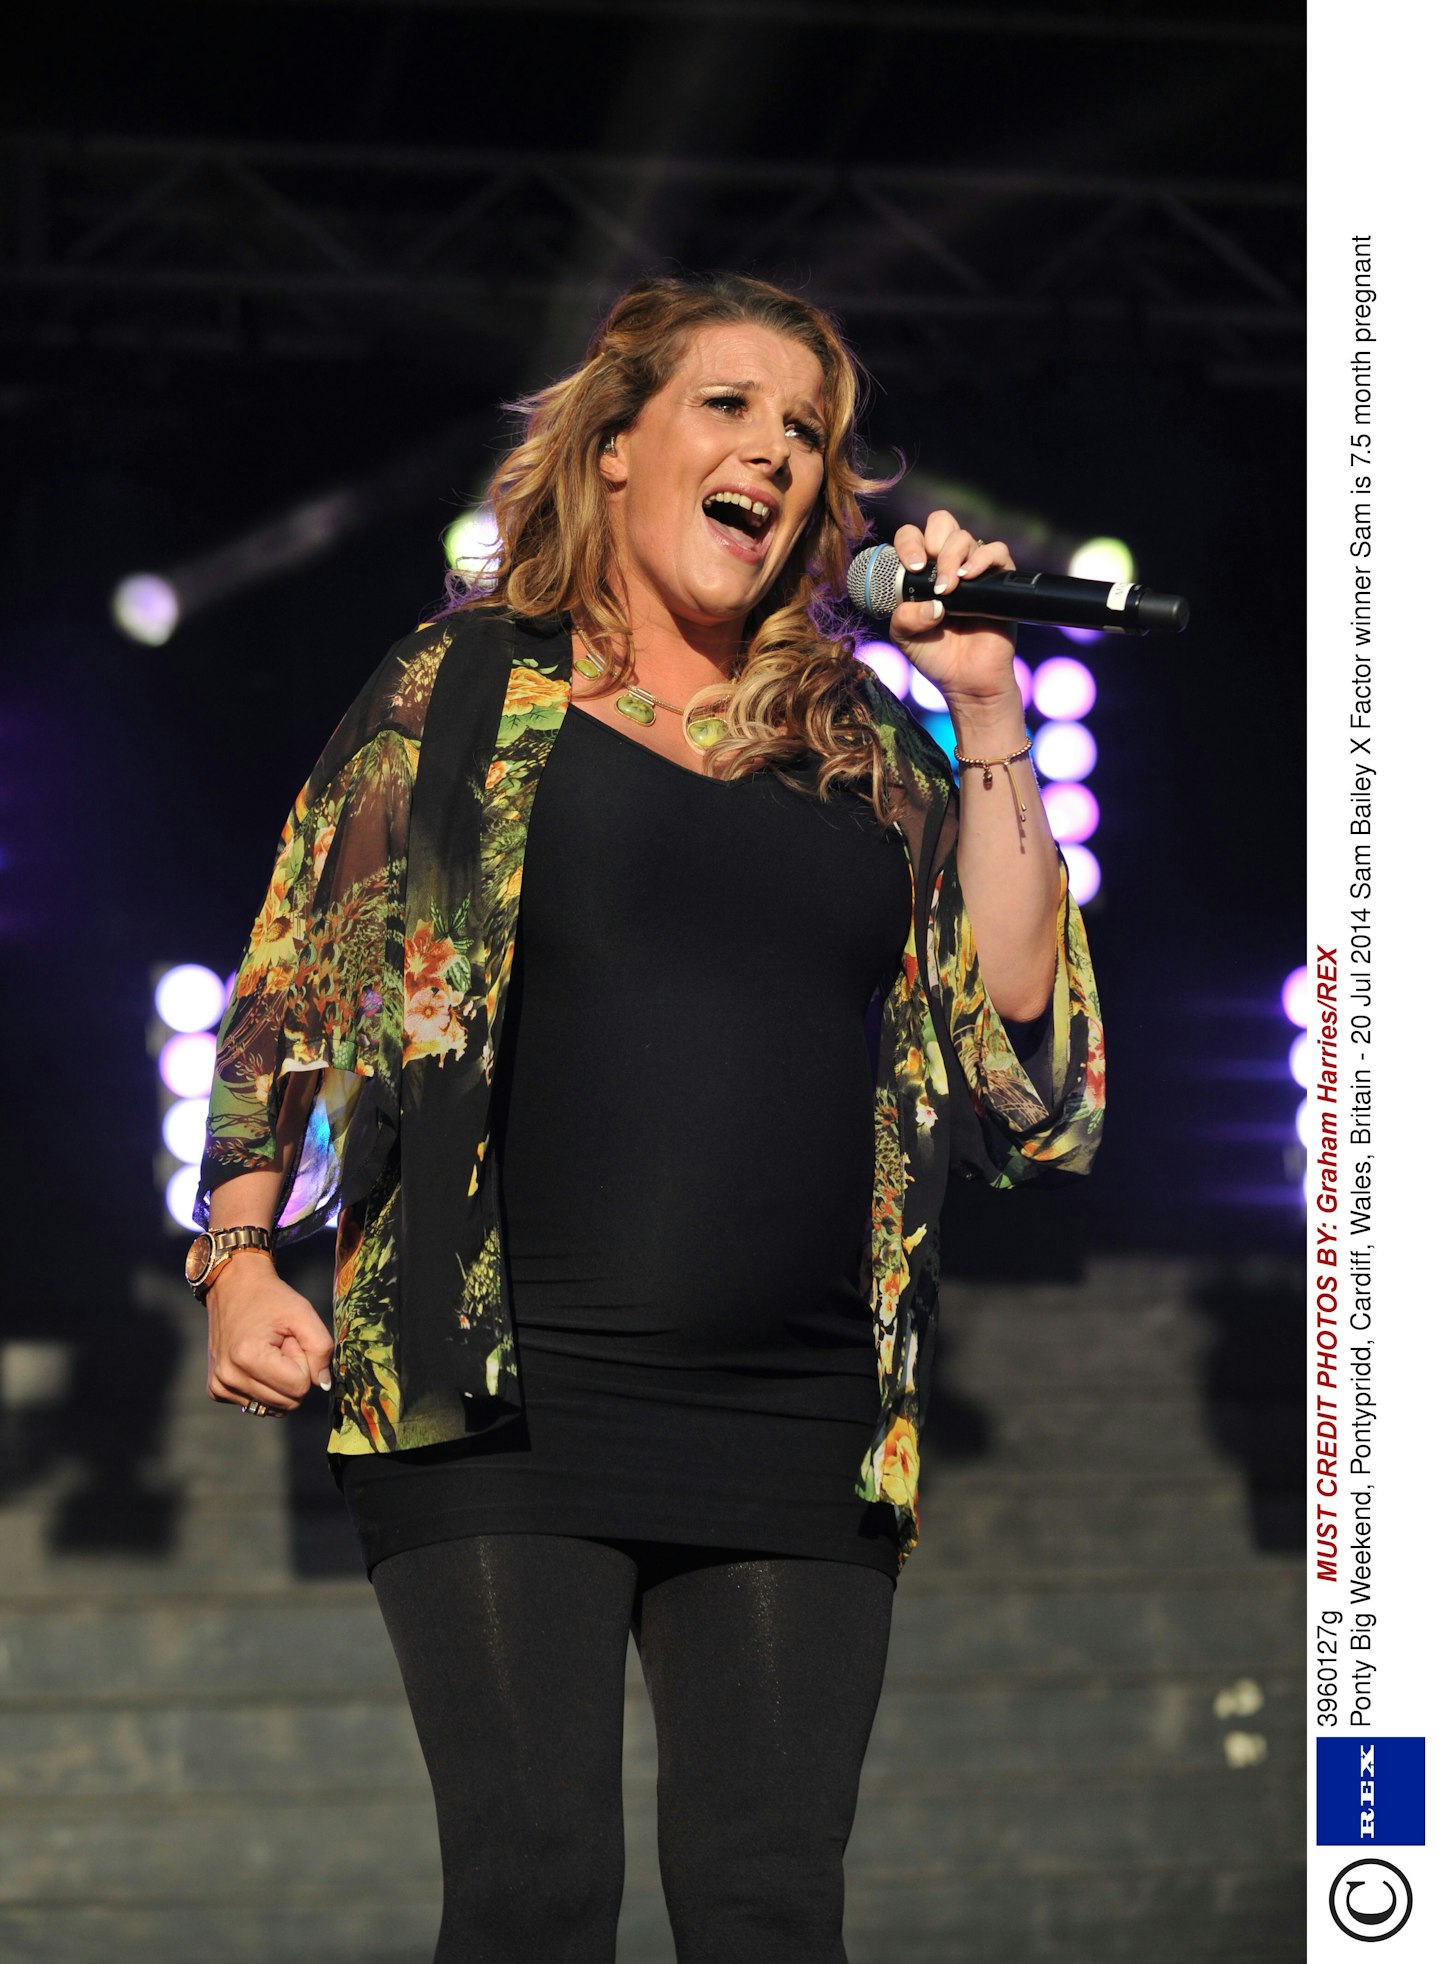 X Factor winner Sam ticks all the right boxes with this maternity stage outfit - LBD paired with a tropical print shirt and matching necklace. Beach meets black tie. 